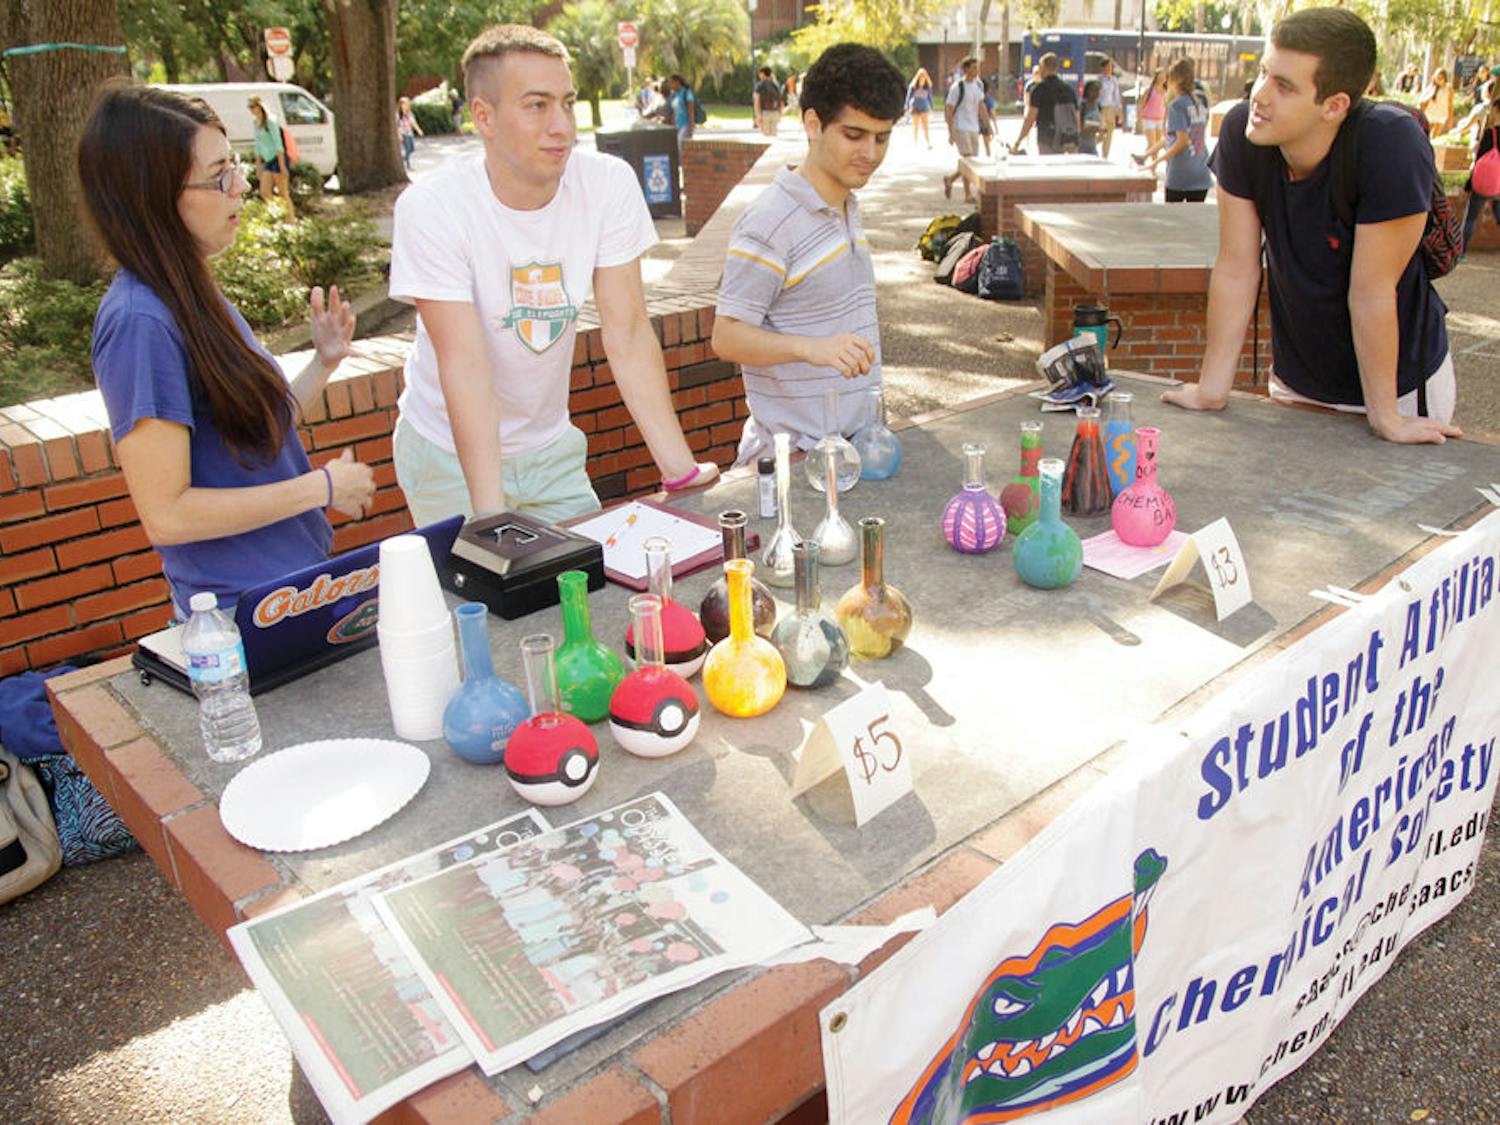 From left, McKenzie Caughlin, 21, Nick Lee, 19, Zared Schwartz,19, and Eliot Gunn, 19, members of the chemistry department sell painted flasks Monday, September 15 at Turlington Plaza to raise money for Paws on Parole. The group helps rehabilitate abused dogs.